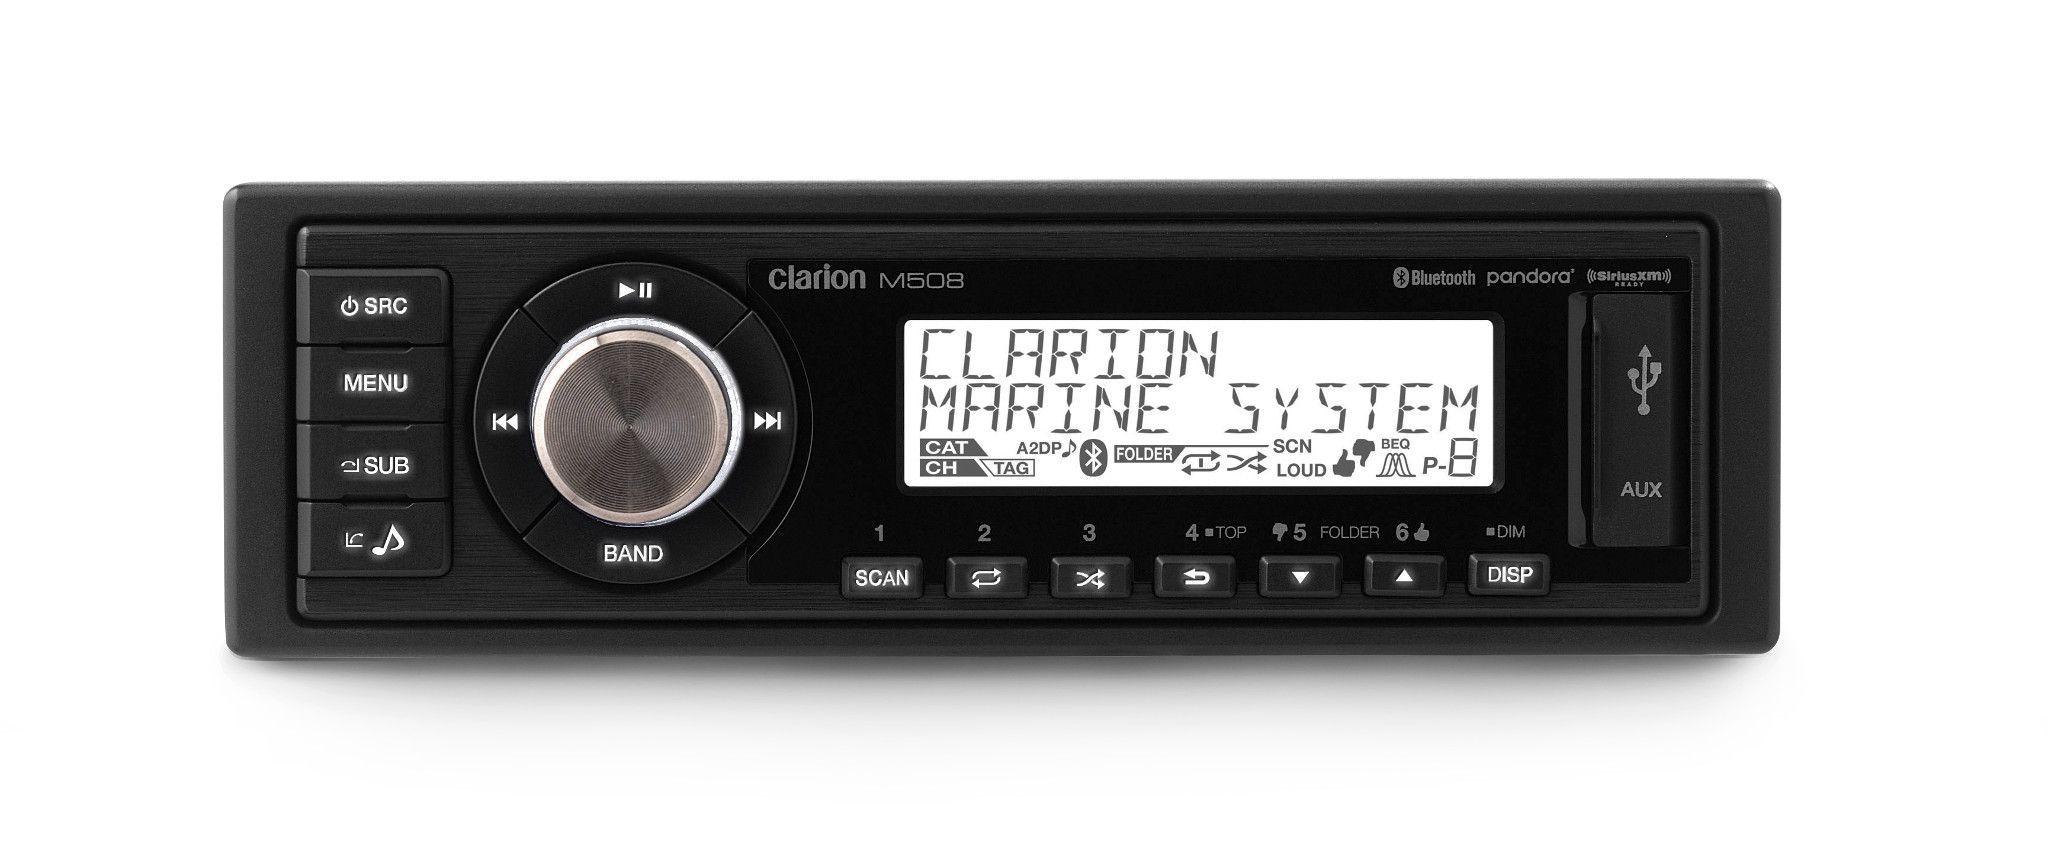 CLARION Digital Media Receiver. Standard DIN chassis and faceplate. Features: AM/FM/WB, Bluetooth with AptX, USB, Aux Input, Pandora and SiriusXM-ready, MFI for Apple iPod/iPhone USB Compatibility *Th